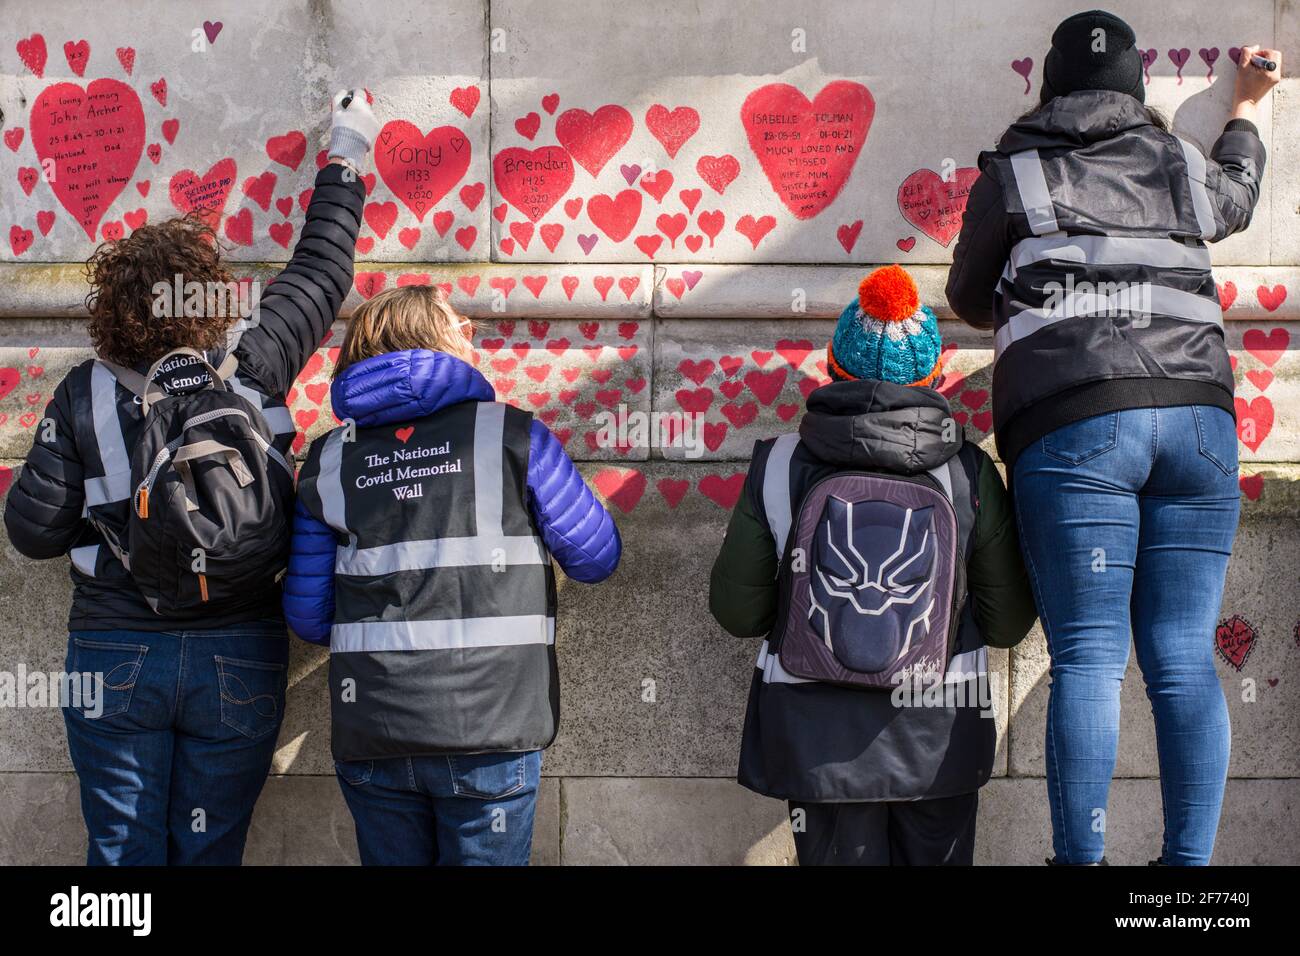 London, UK. 05th Apr, 2021. Volunteers paint red hearts on the National Covid Memorial Wall in London. The National Covid Memorial Wall in London outside St Thomas' Hospital is being hand-painted with 150000 hearts to honor UK Covid-19 victims. Credit: SOPA Images Limited/Alamy Live News Stock Photo